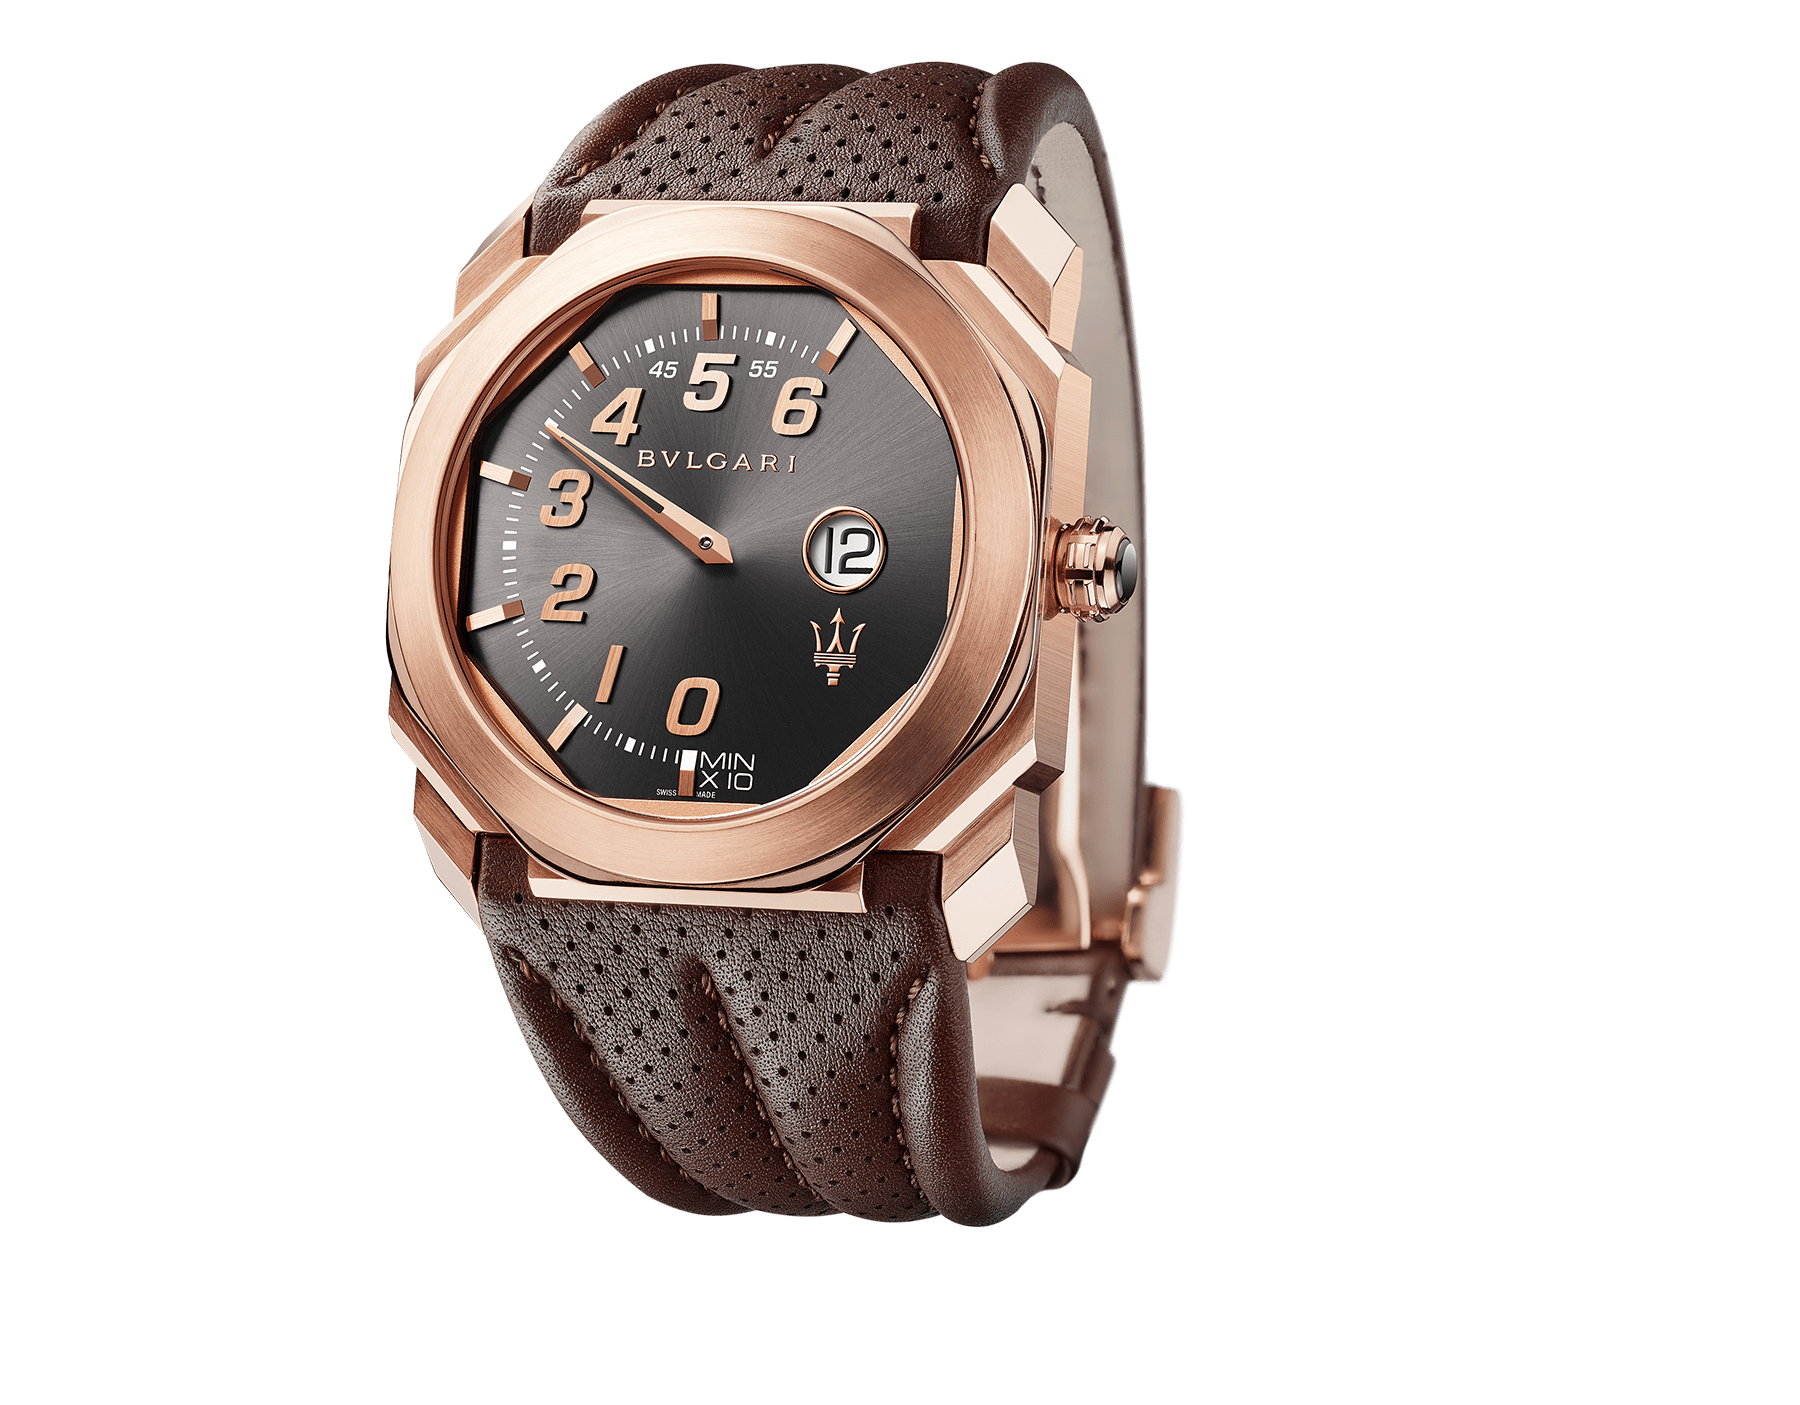 bvlgari limited edition watches